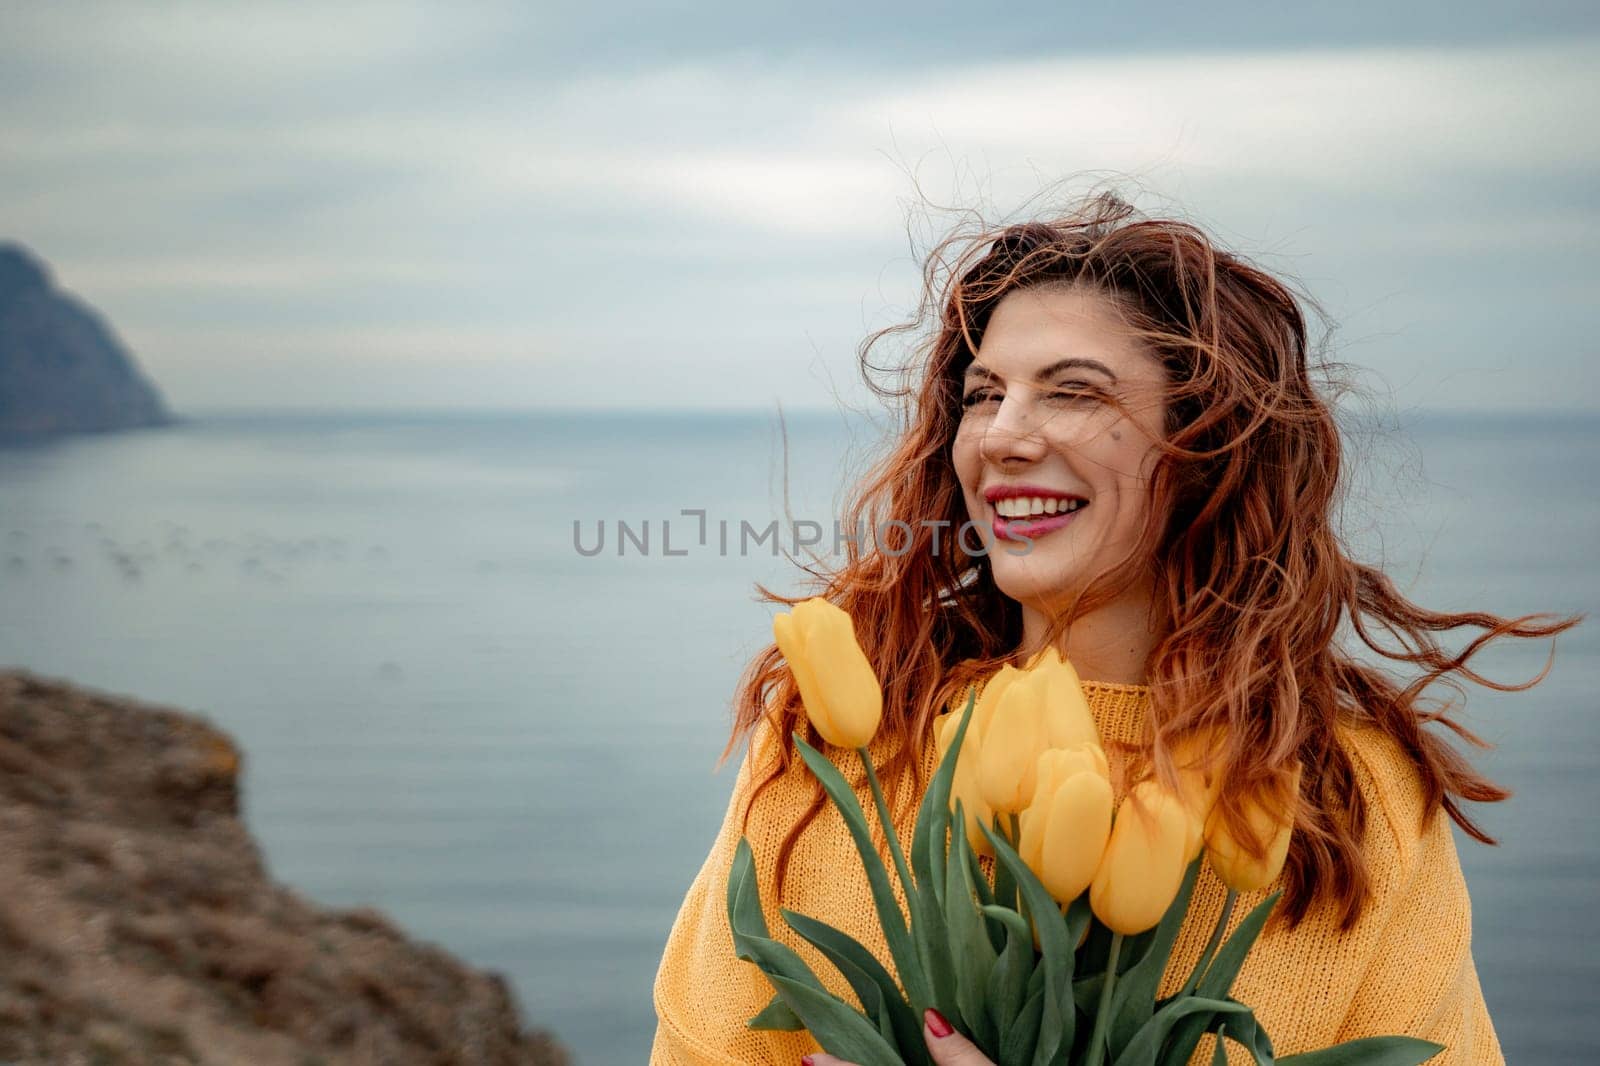 Portrait of a happy woman with hair flying in the wind against the backdrop of mountains and sea. Holding a bouquet of yellow tulips in her hands, wearing a yellow sweater by Matiunina